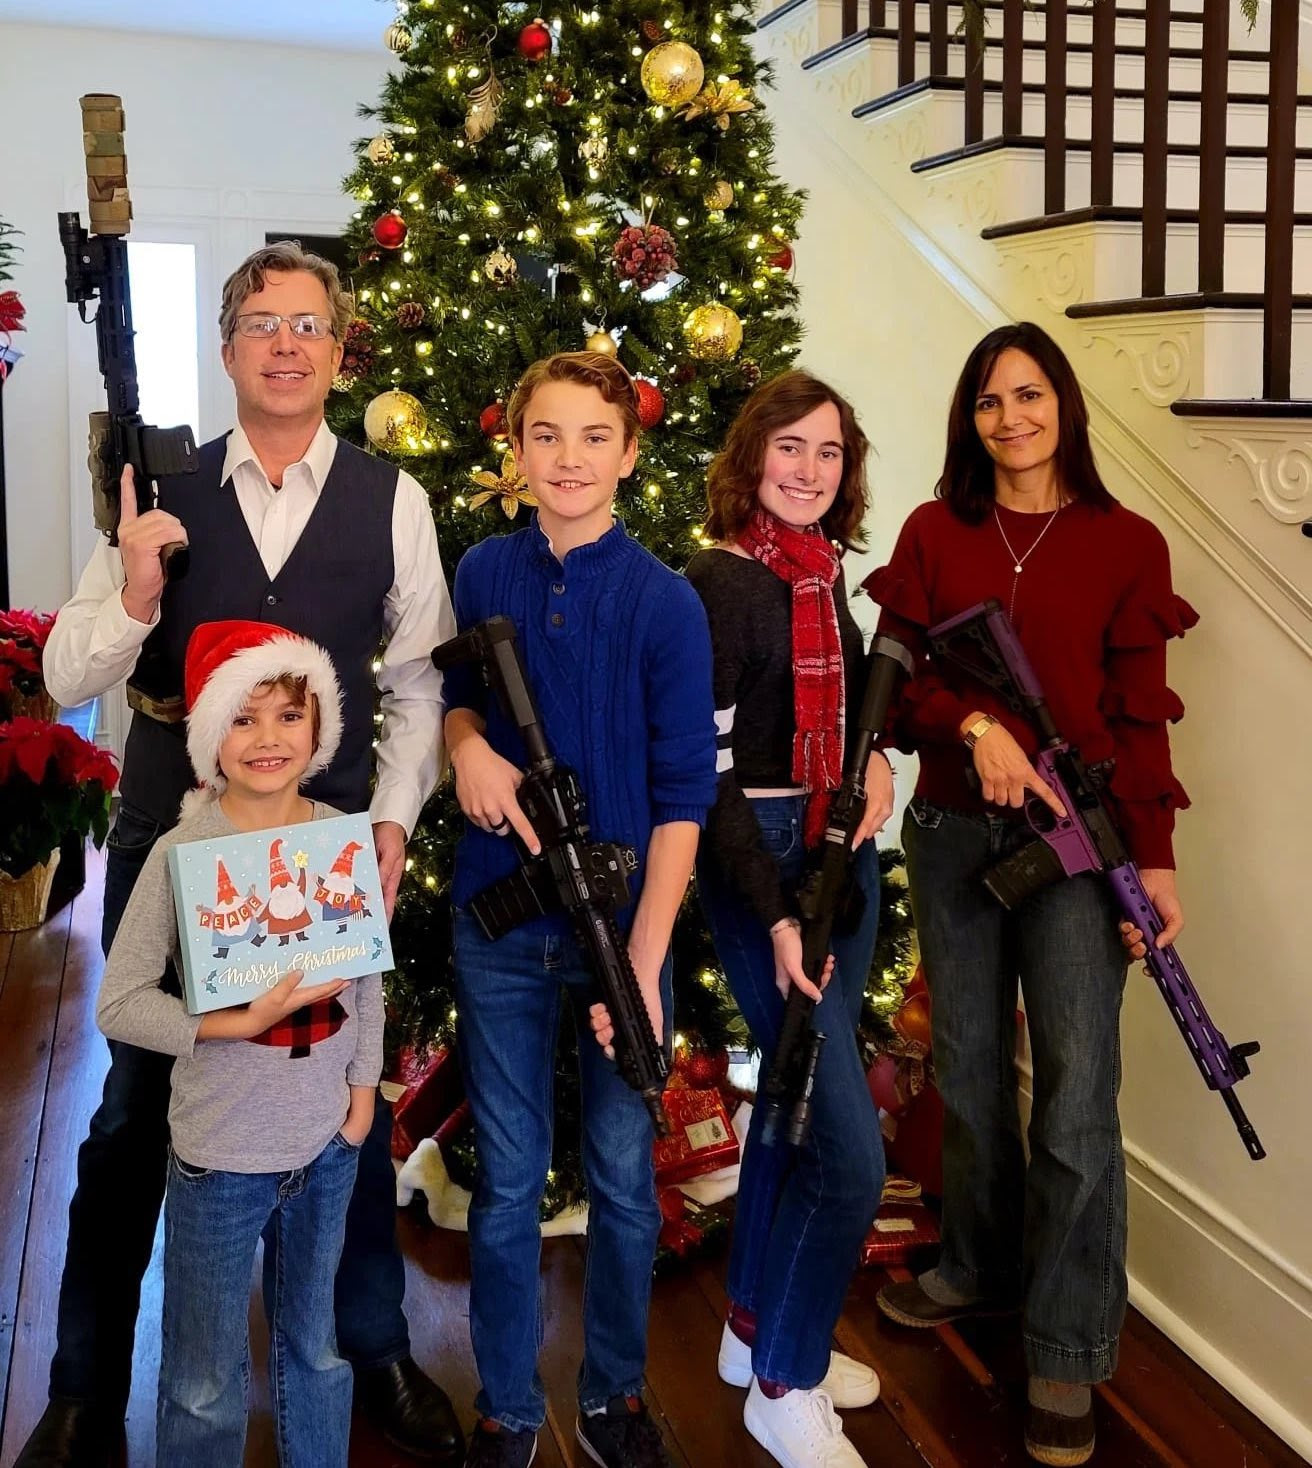 Photo of Rep Ogles' family holding assault weapons in front of a holiday tree